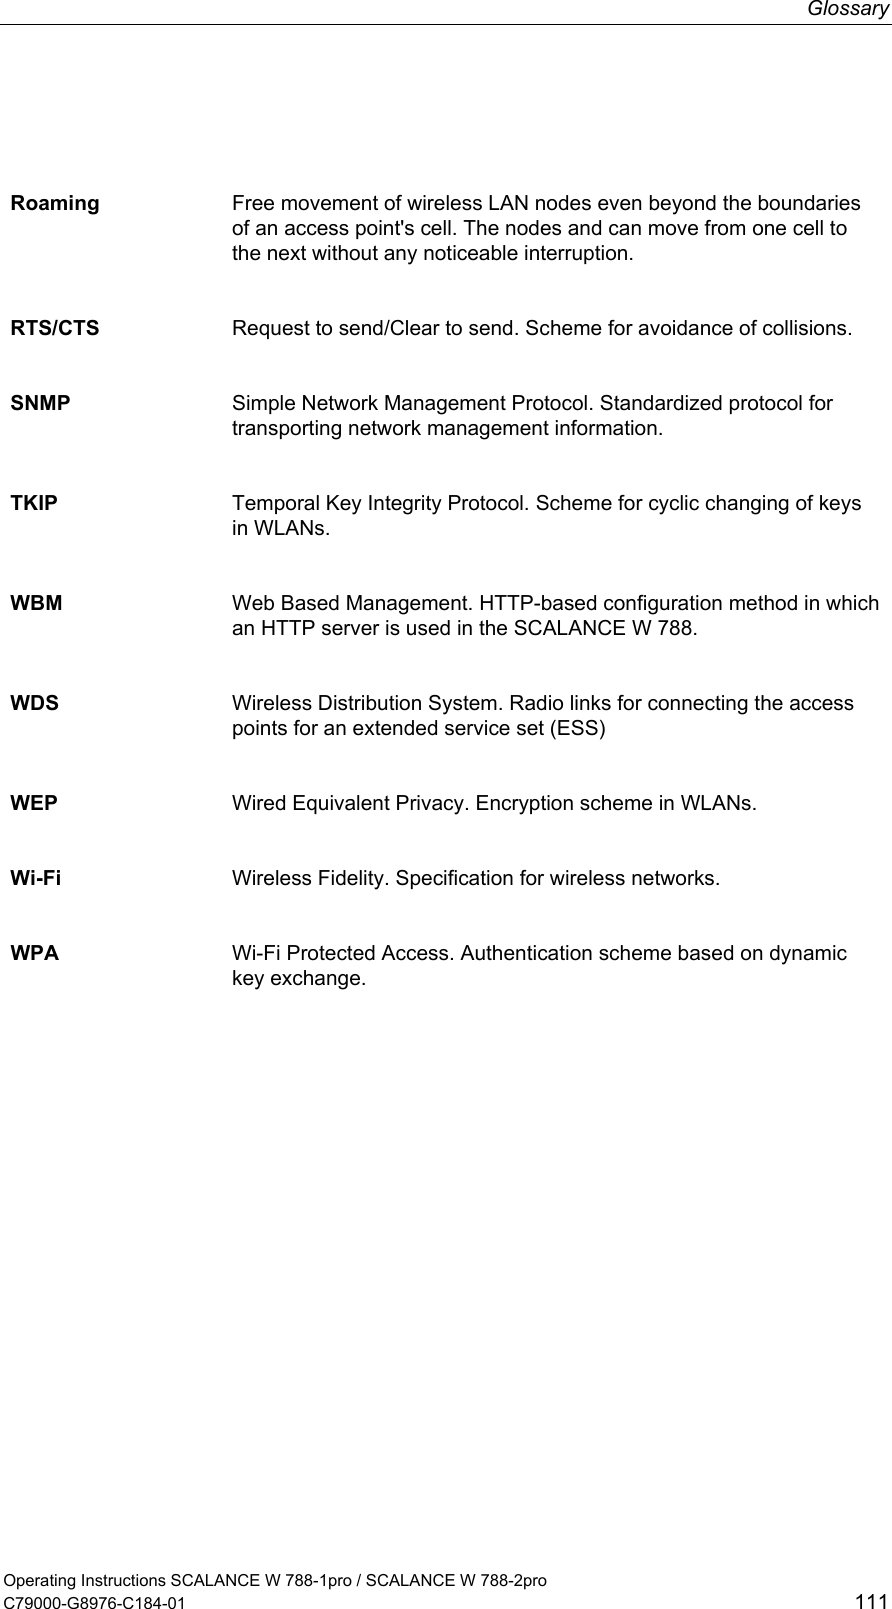 Glossary  Roaming  Free movement of wireless LAN nodes even beyond the boundaries of an access point&apos;s cell. The nodes and can move from one cell to the next without any noticeable interruption.  RTS/CTS  Request to send/Clear to send. Scheme for avoidance of collisions. SNMP  Simple Network Management Protocol. Standardized protocol for transporting network management information. TKIP  Temporal Key Integrity Protocol. Scheme for cyclic changing of keys in WLANs. WBM  Web Based Management. HTTP-based configuration method in which an HTTP server is used in the SCALANCE W 788. WDS  Wireless Distribution System. Radio links for connecting the access points for an extended service set (ESS) WEP  Wired Equivalent Privacy. Encryption scheme in WLANs. Wi-Fi  Wireless Fidelity. Specification for wireless networks. WPA  Wi-Fi Protected Access. Authentication scheme based on dynamic key exchange.   Operating Instructions SCALANCE W 788-1pro / SCALANCE W 788-2pro C79000-G8976-C184-01  111 